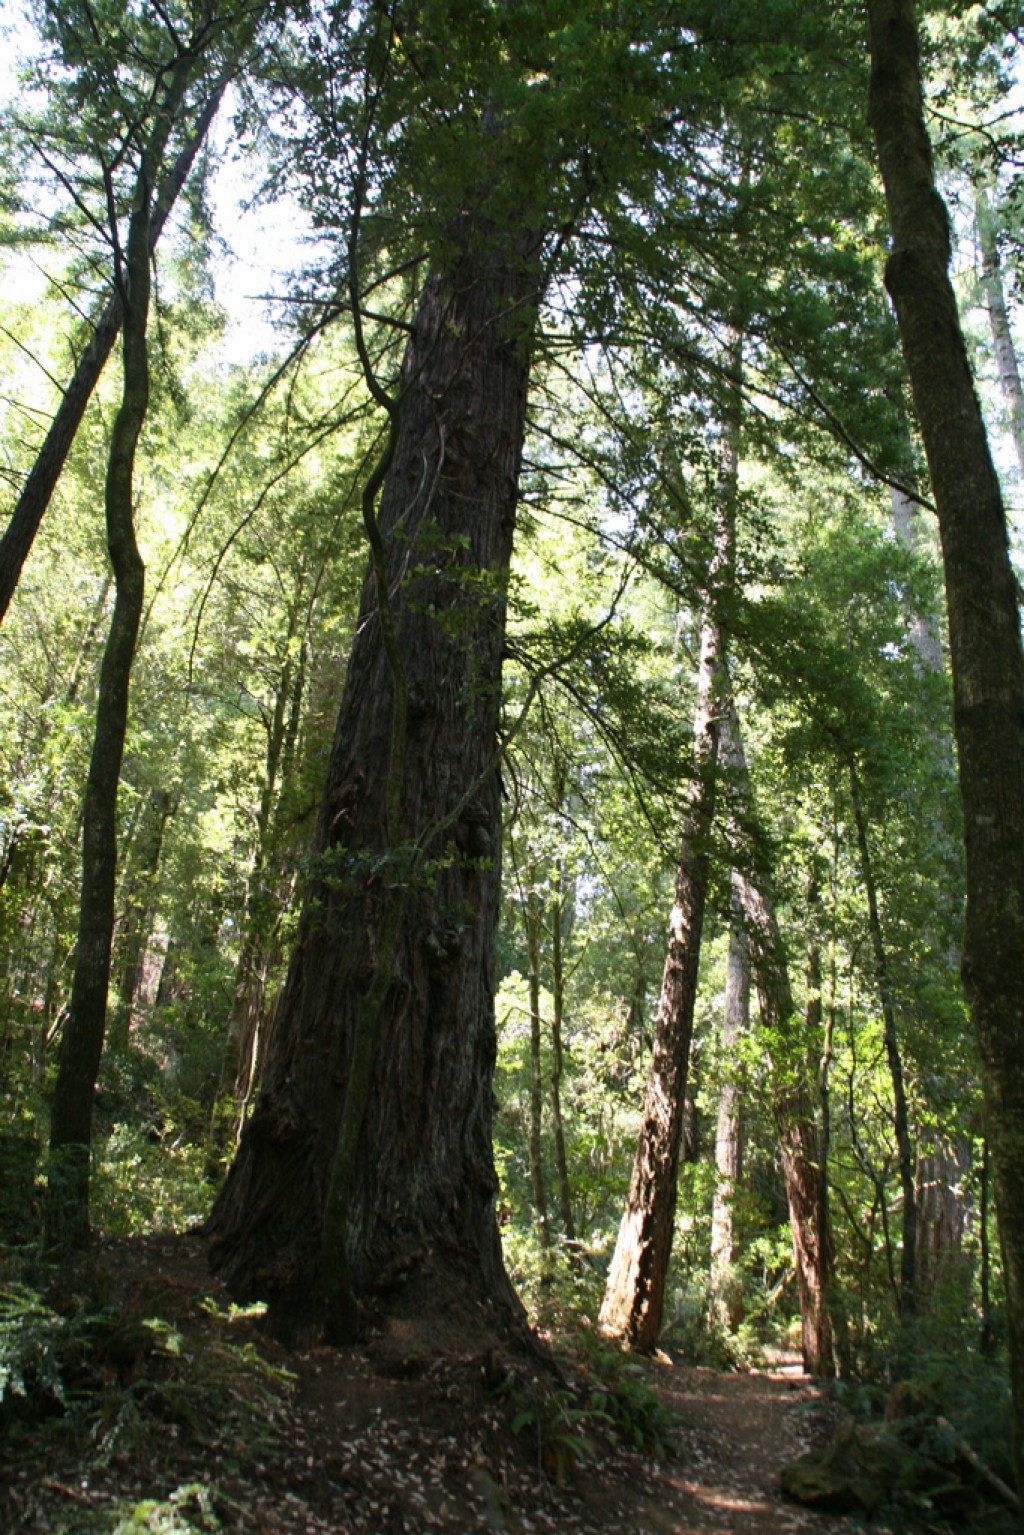 We enjoyed an easy hike through some beautiful forest in the Redwood State Park, close to Brookings, OR